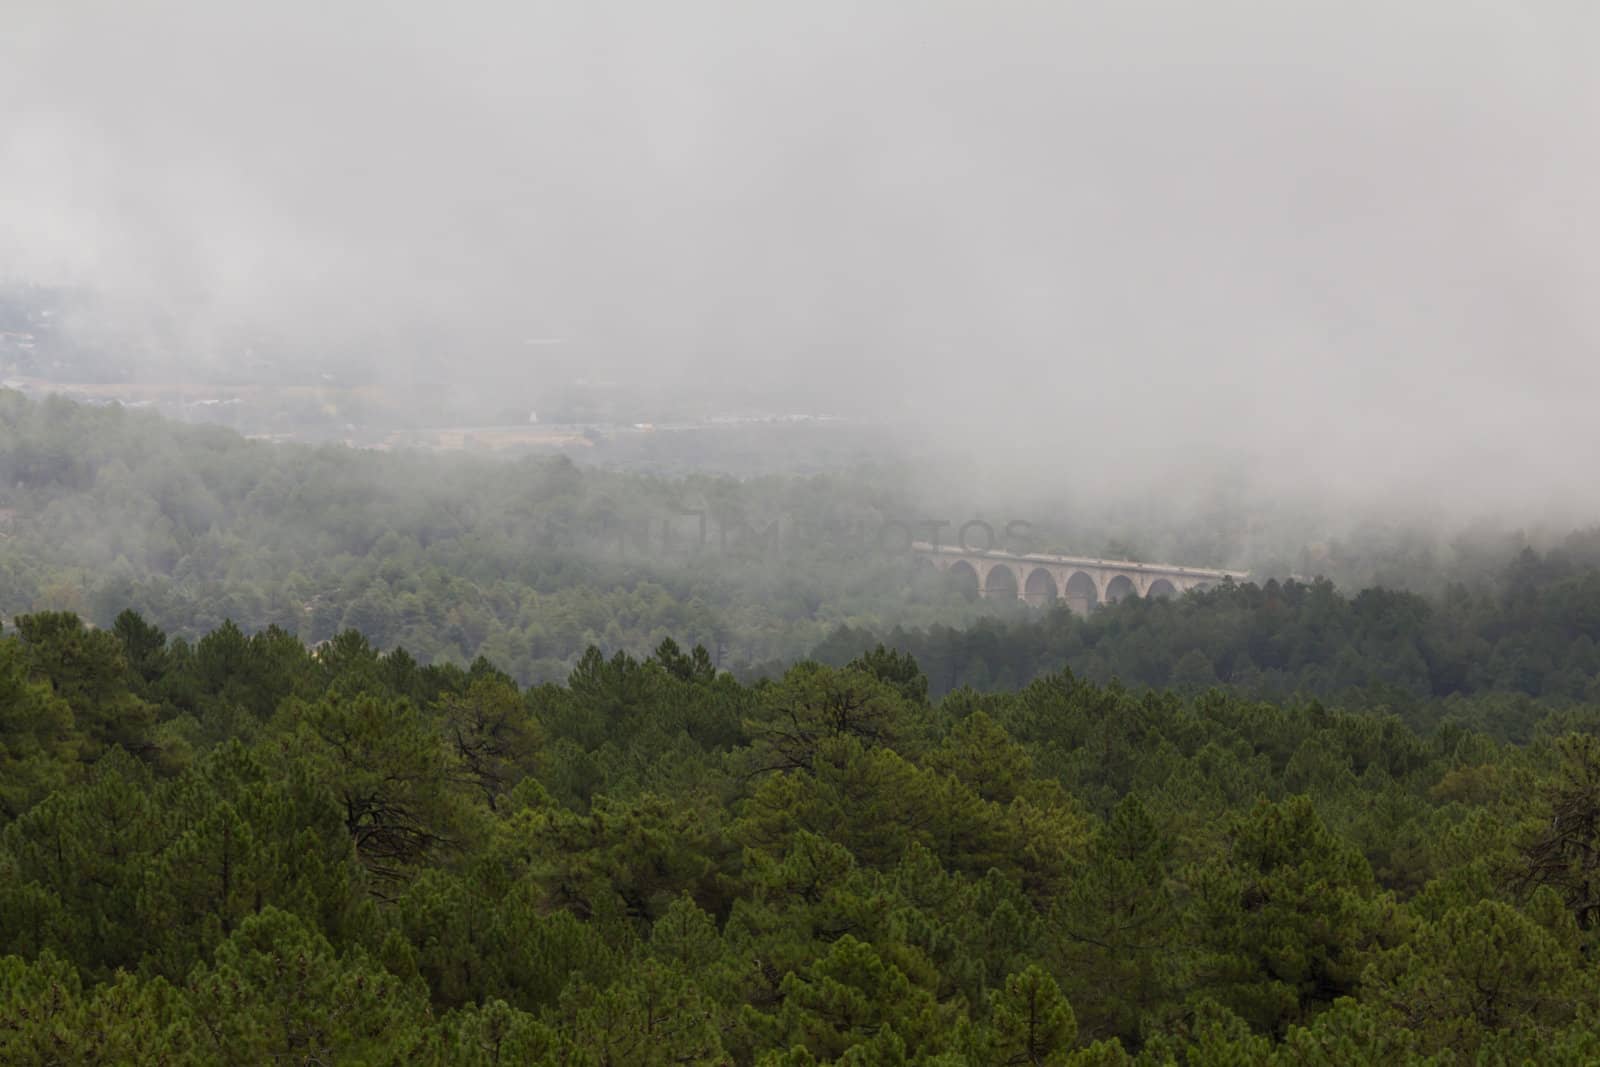 A bridge in the valley of fallen heroes (close to Madrid, Spain) in the fog